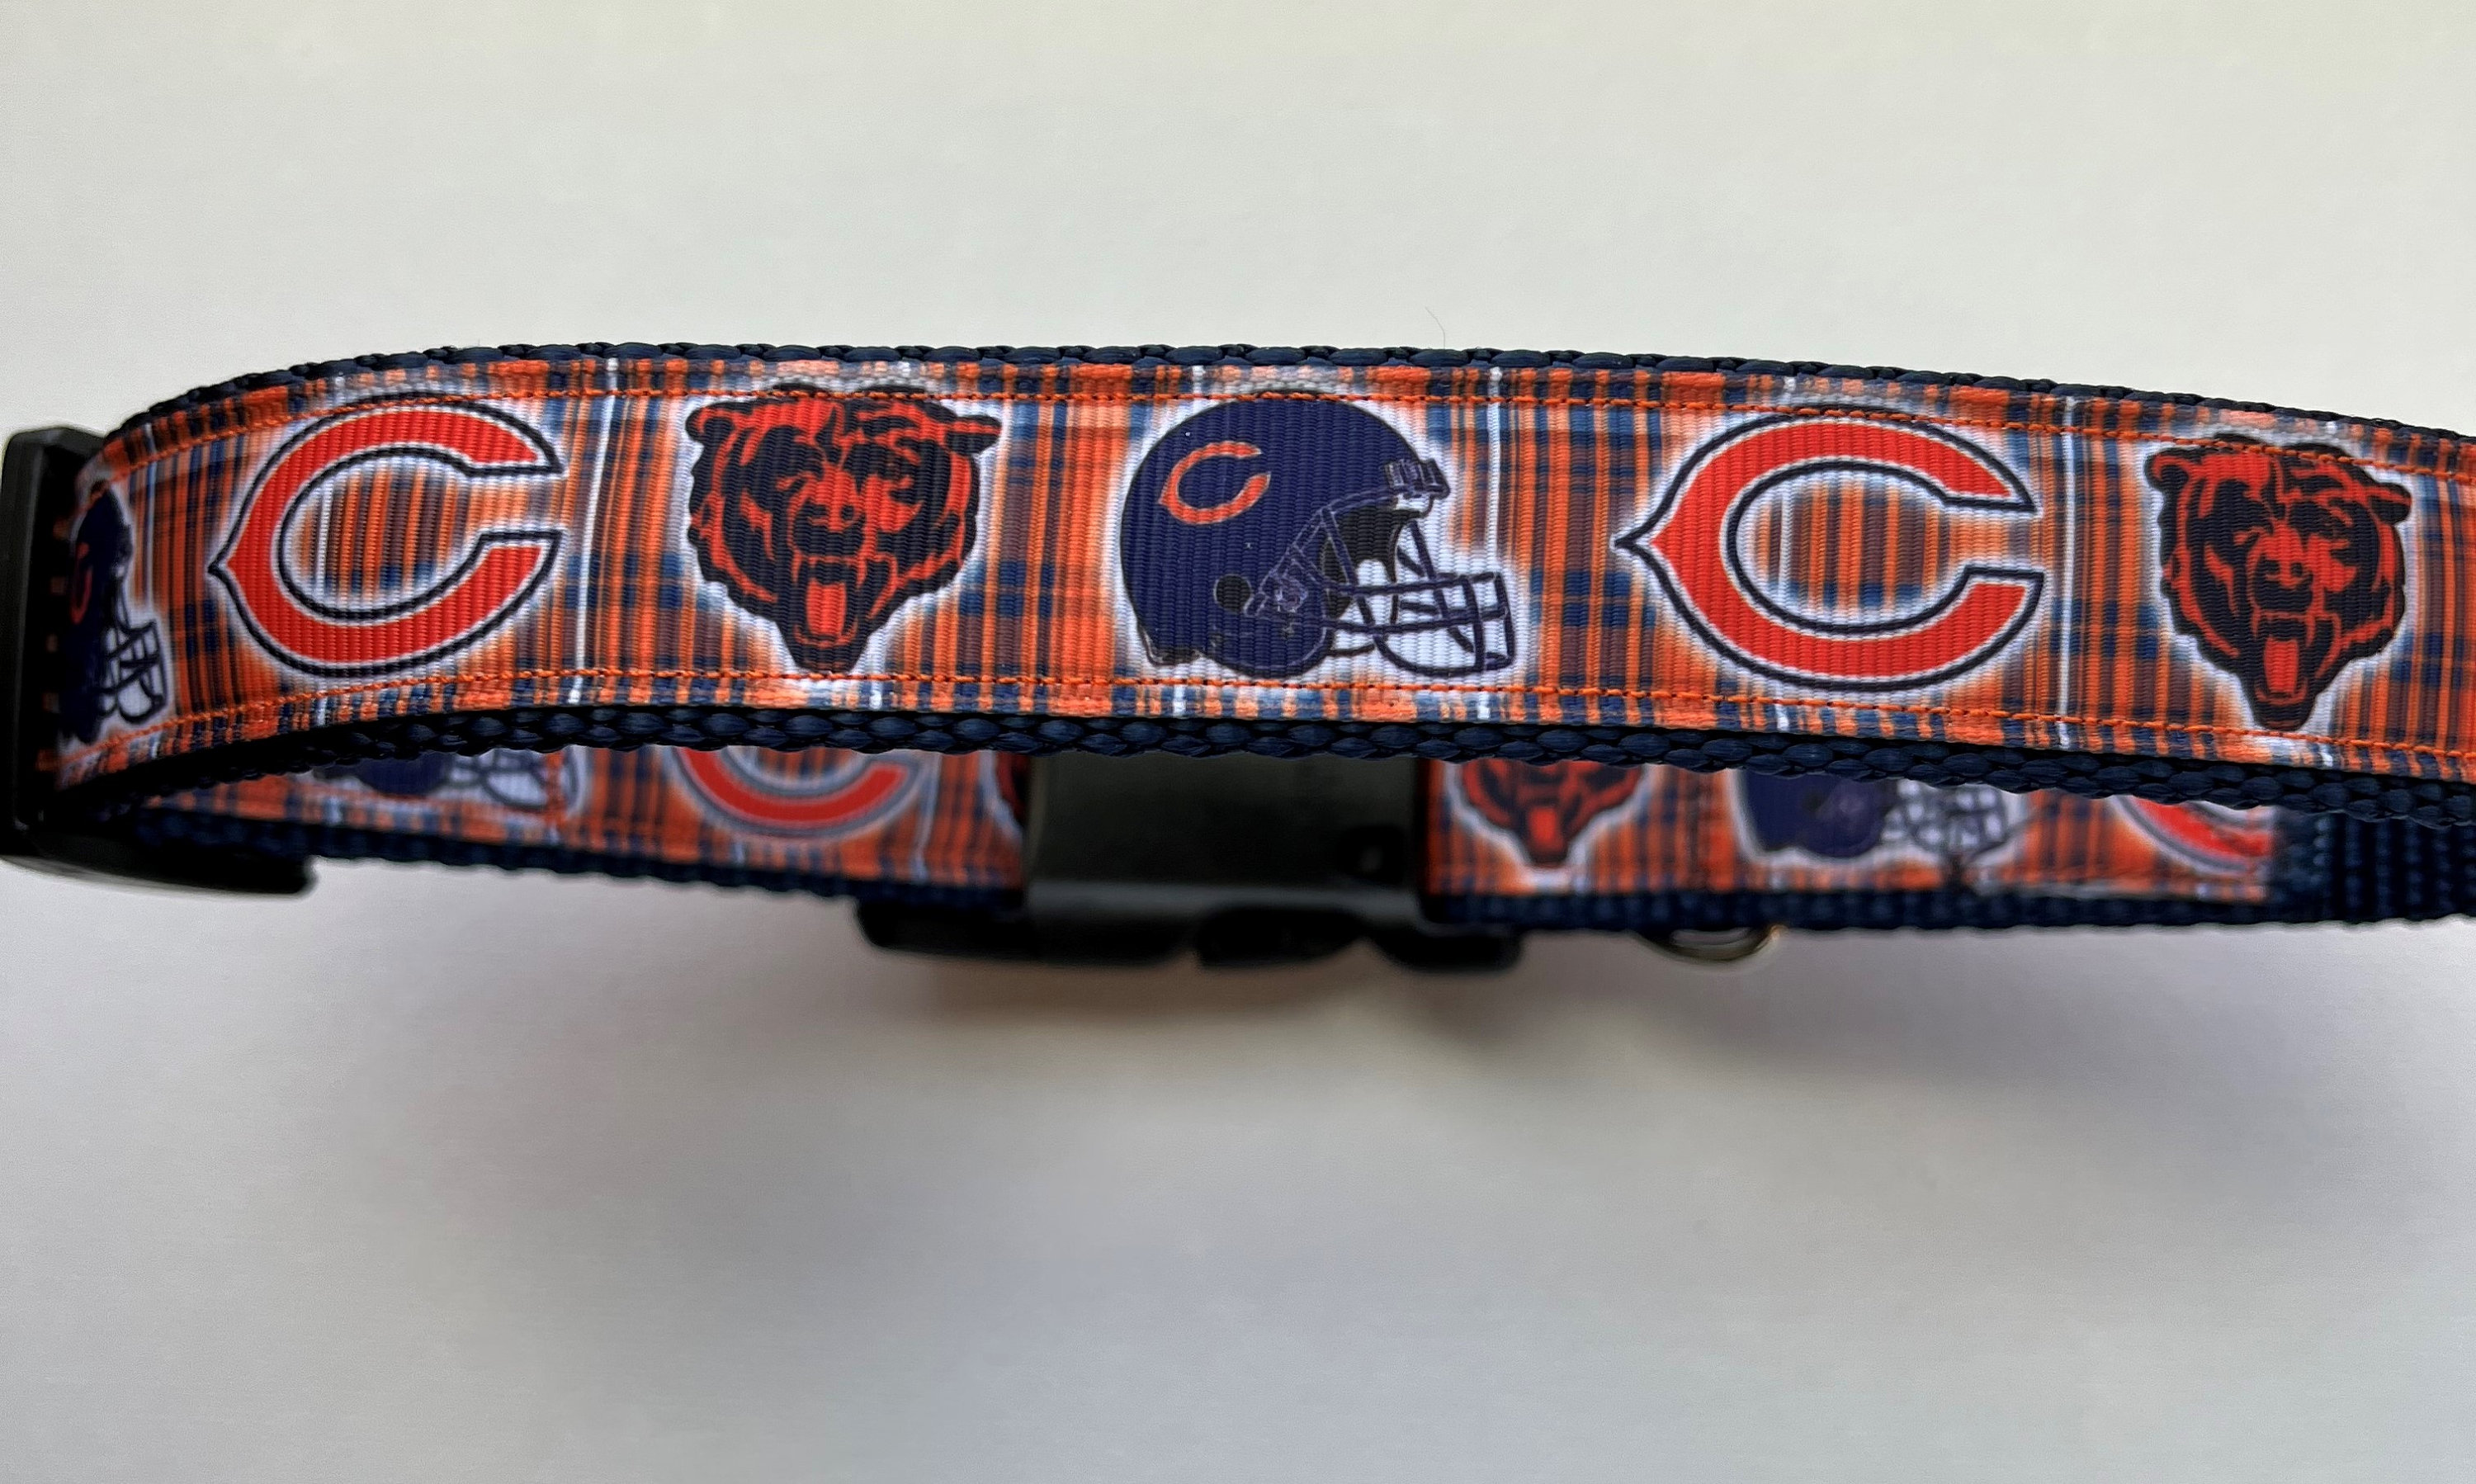 Chicago Bears Front Clip Pet Harness - Large